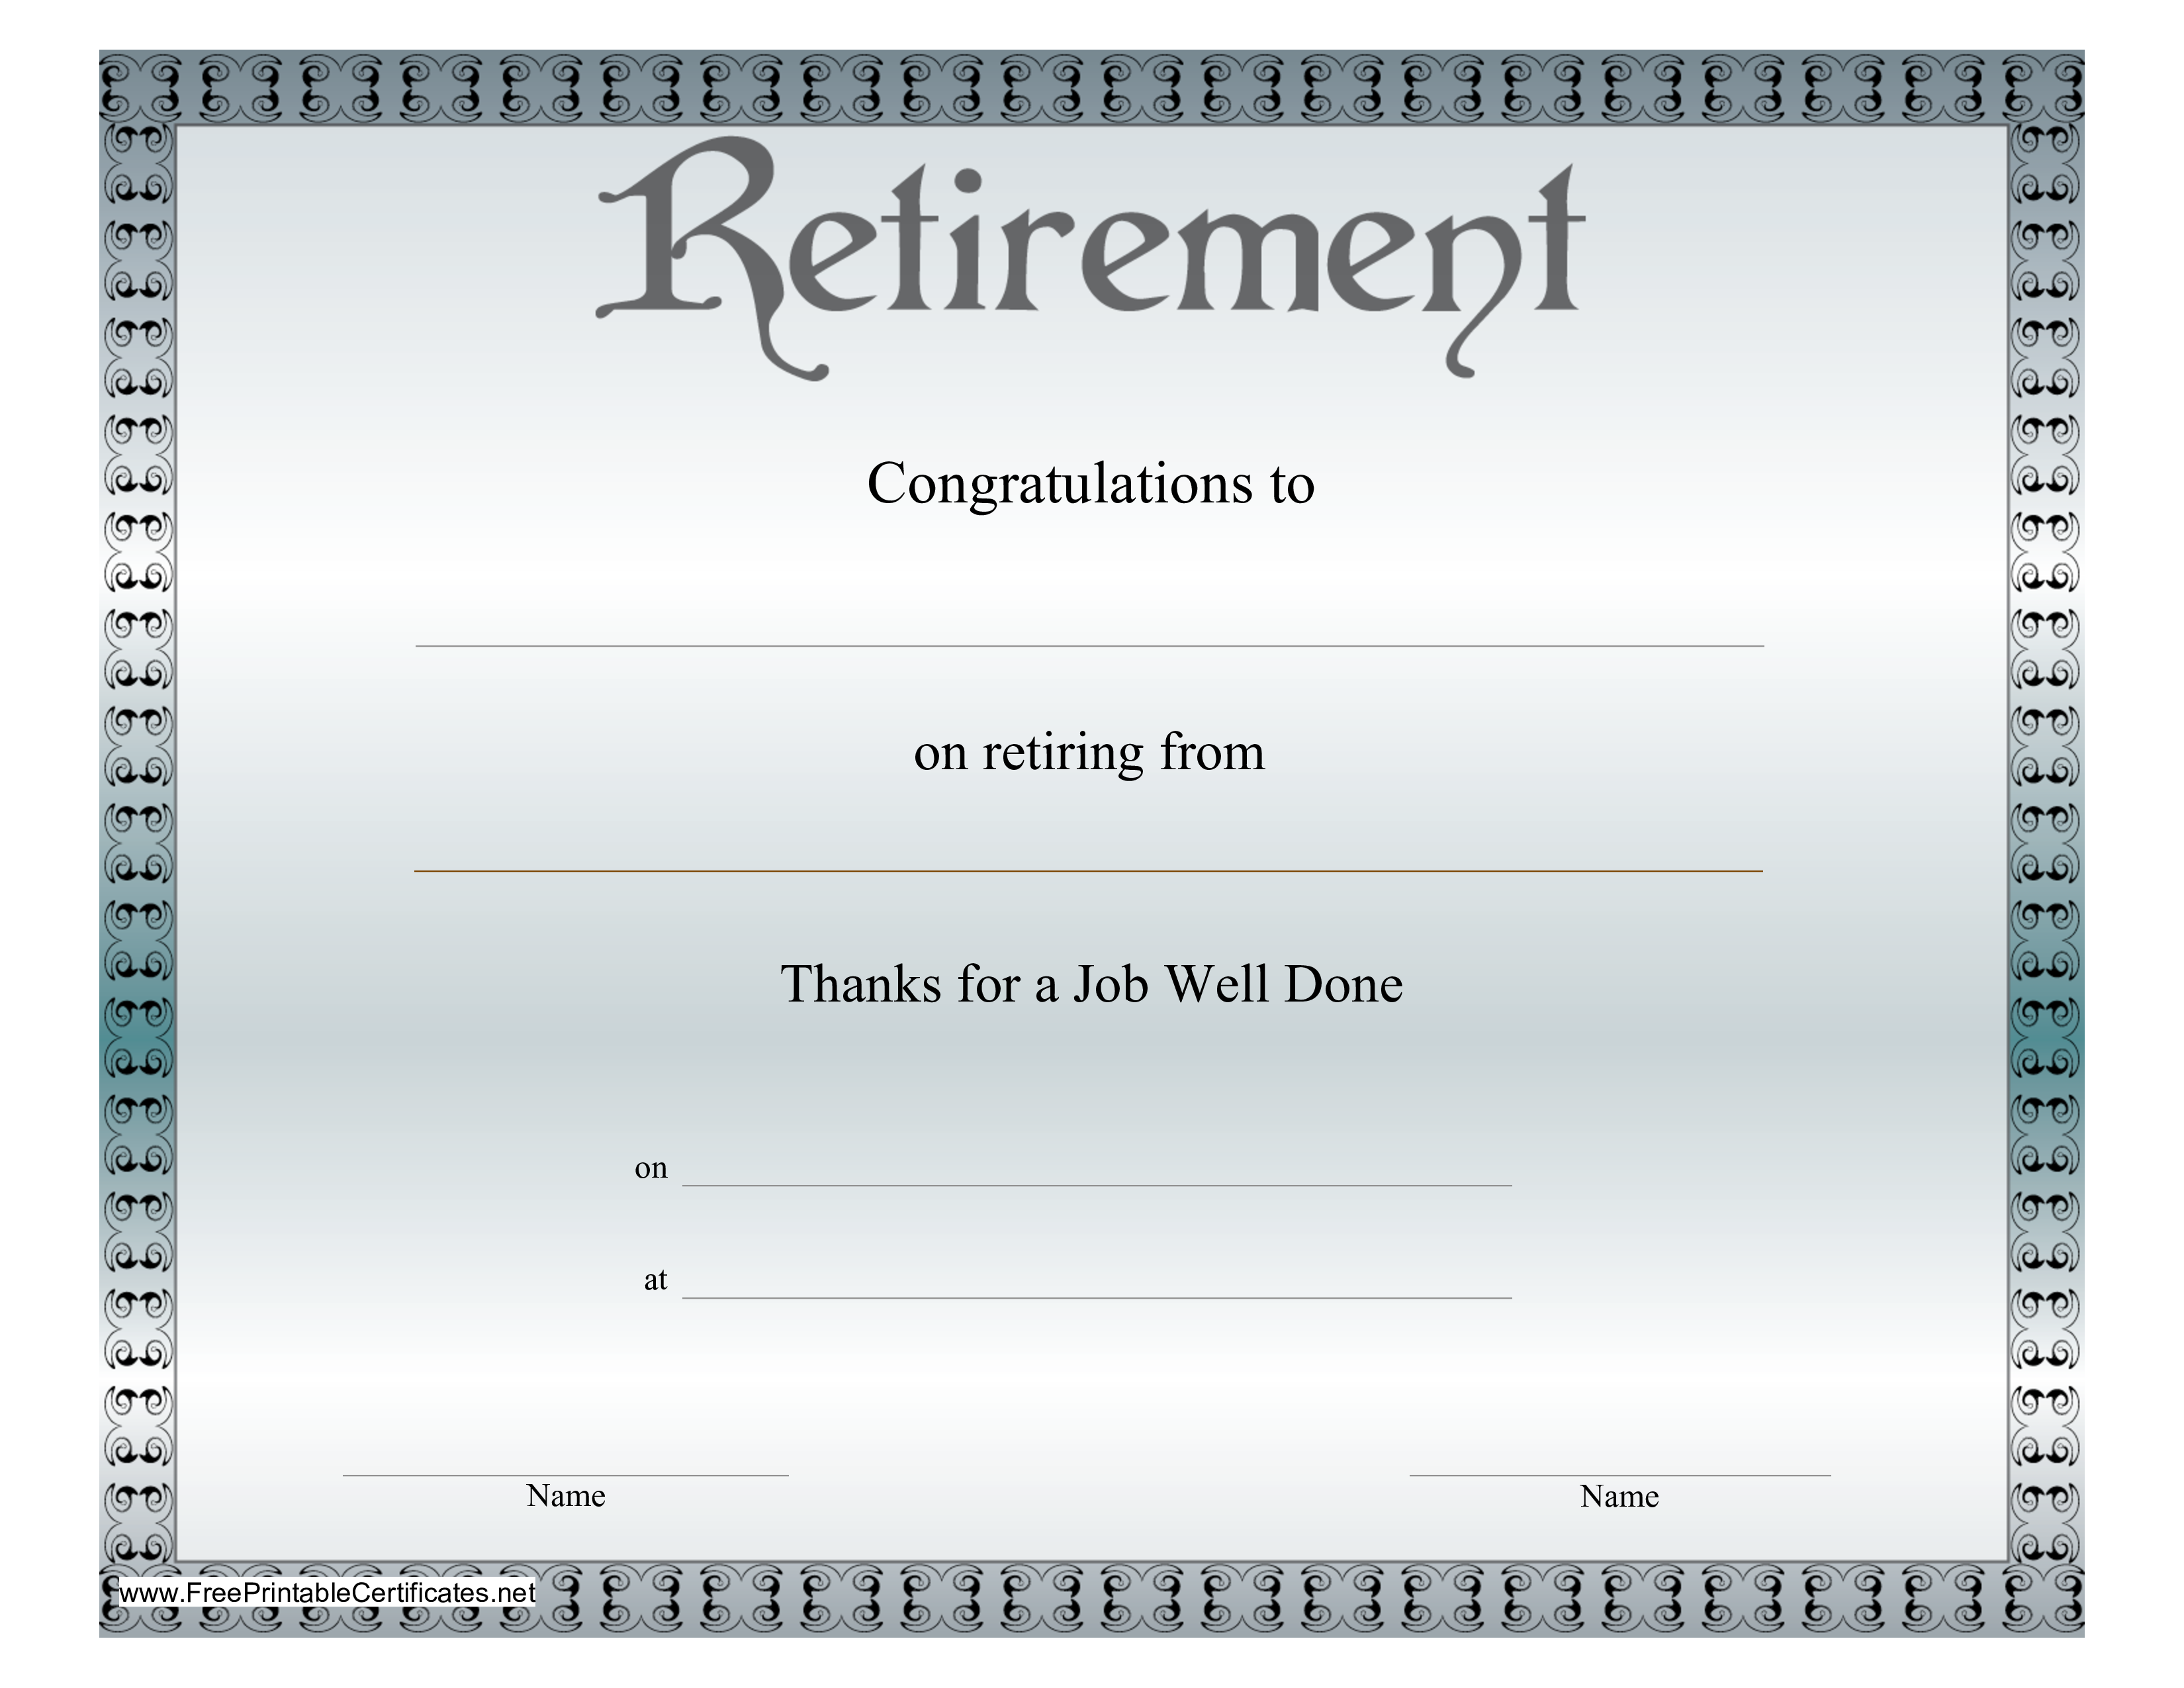 Retirement Certificate  Templates at allbusinesstemplates.com With Regard To Congratulations Certificate Word Template